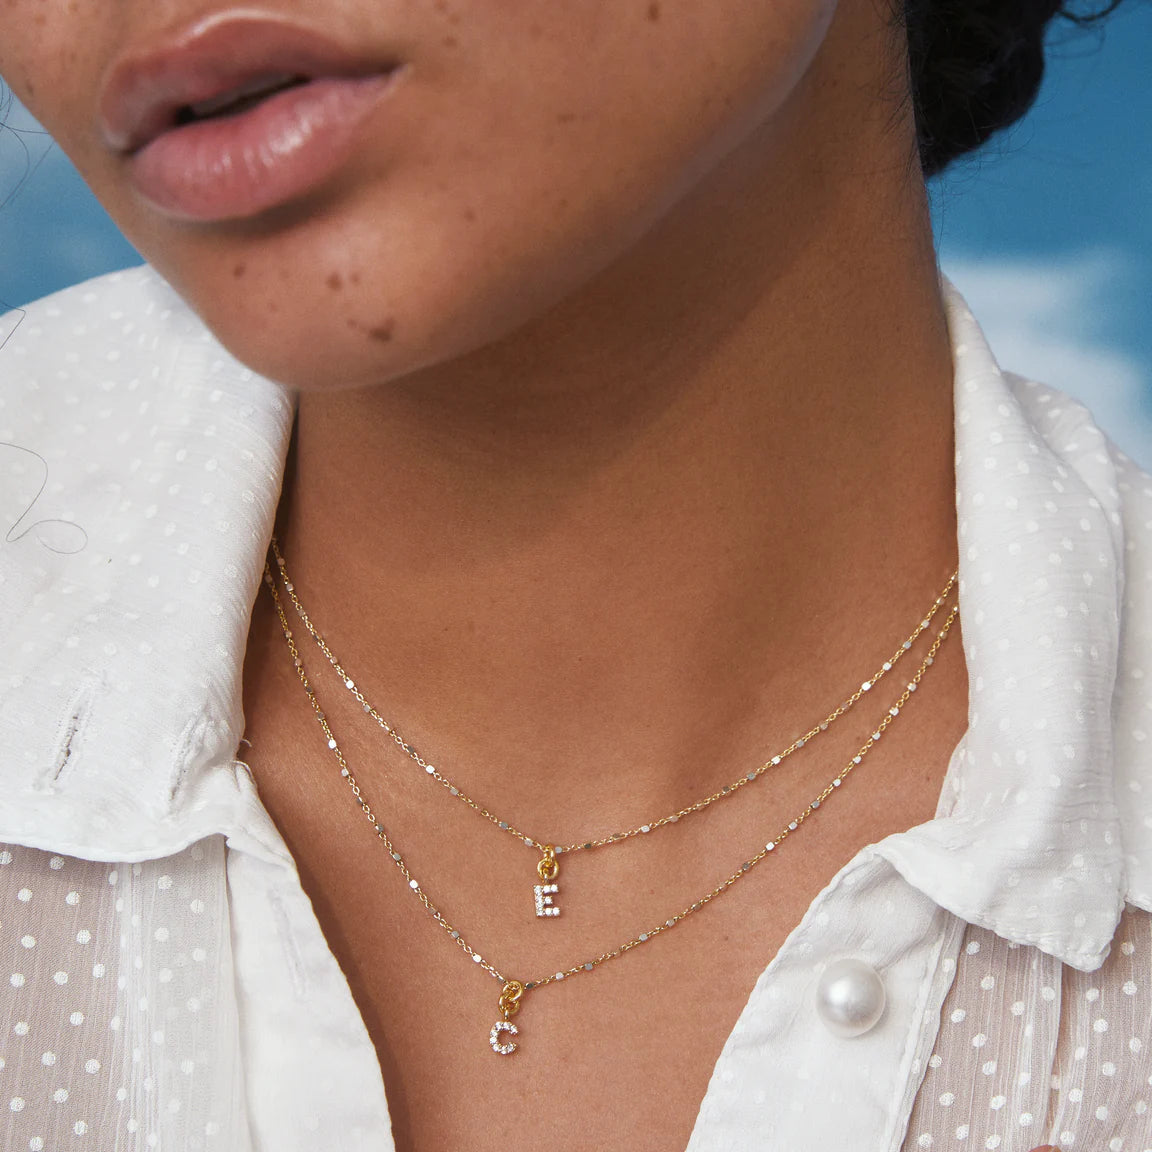 CLEAR CZ IDENTITY NECKLACE GOLD - CHOOSE YOUR INITIAL